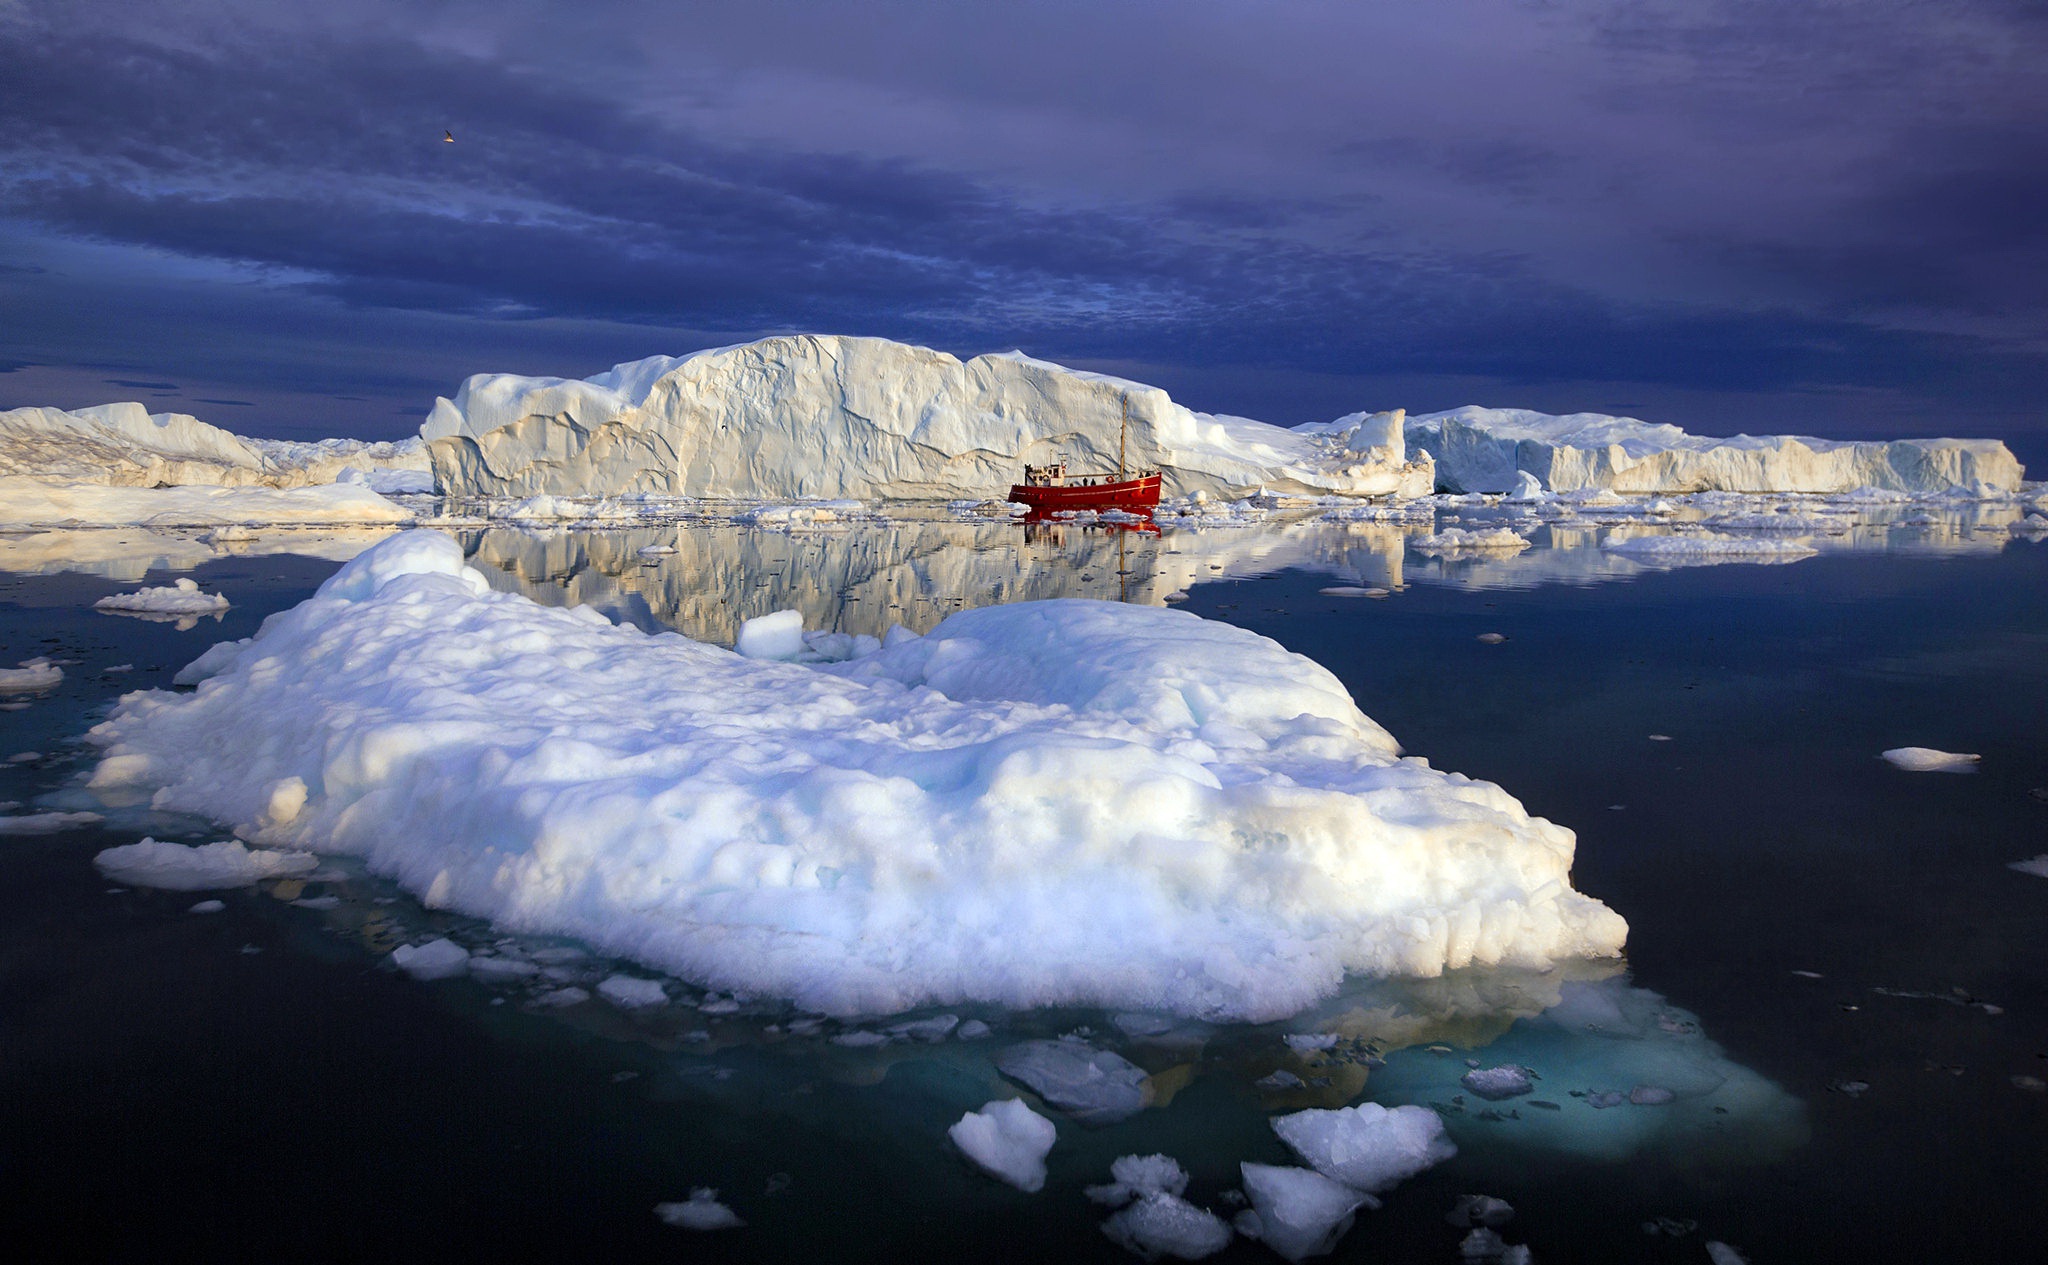 General 2048x1265 ice Arctic vehicle boat water nature